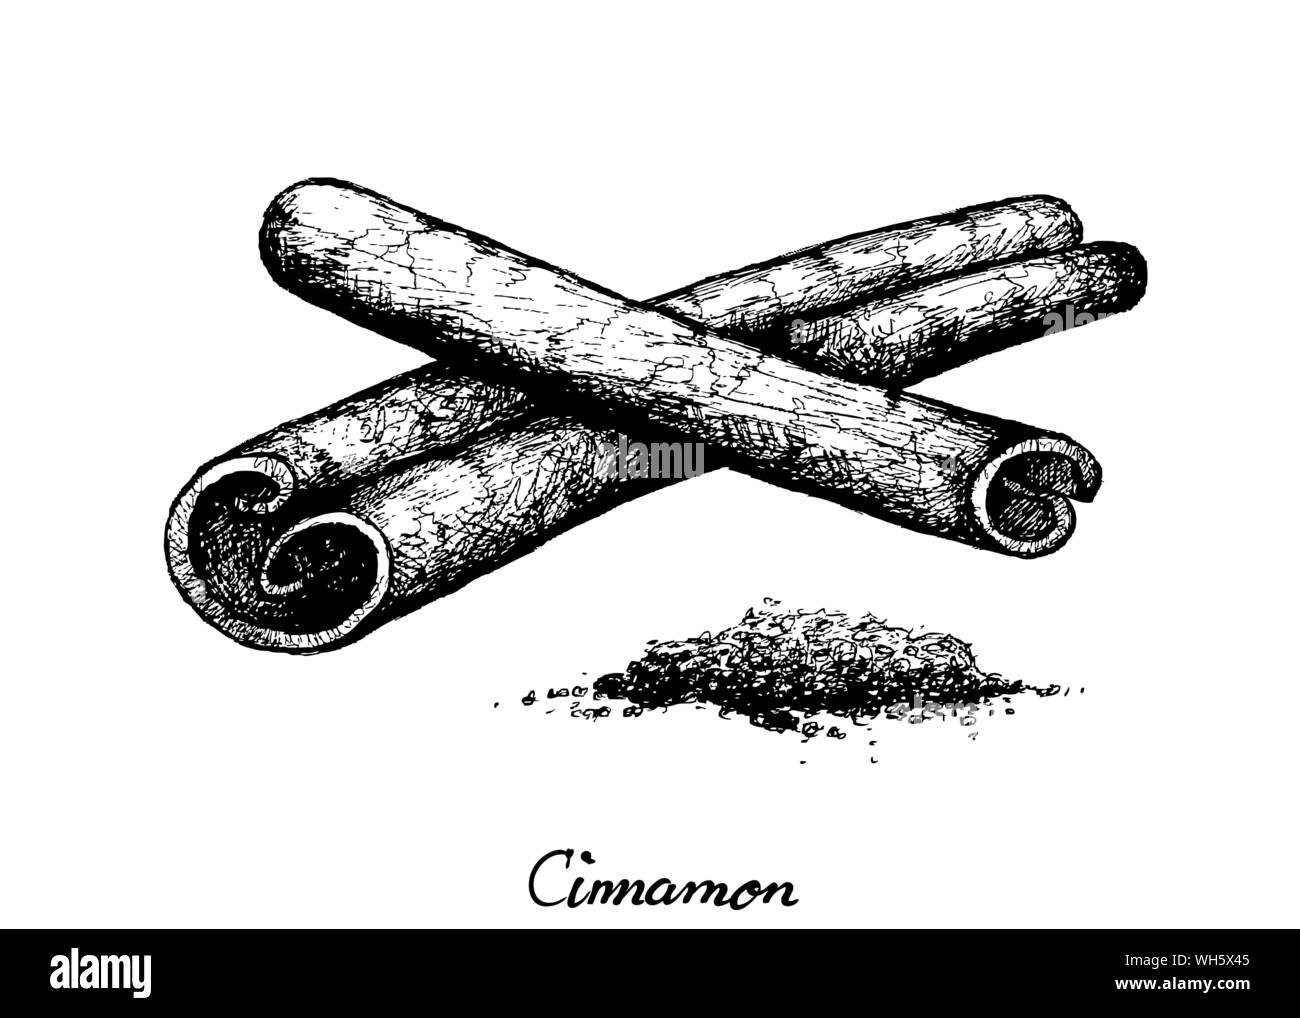 Herbal Plants, Hand Drawn Illustration of Dried Cinnamon Sticks Used for Seasoning in Cooking. Stock Vector